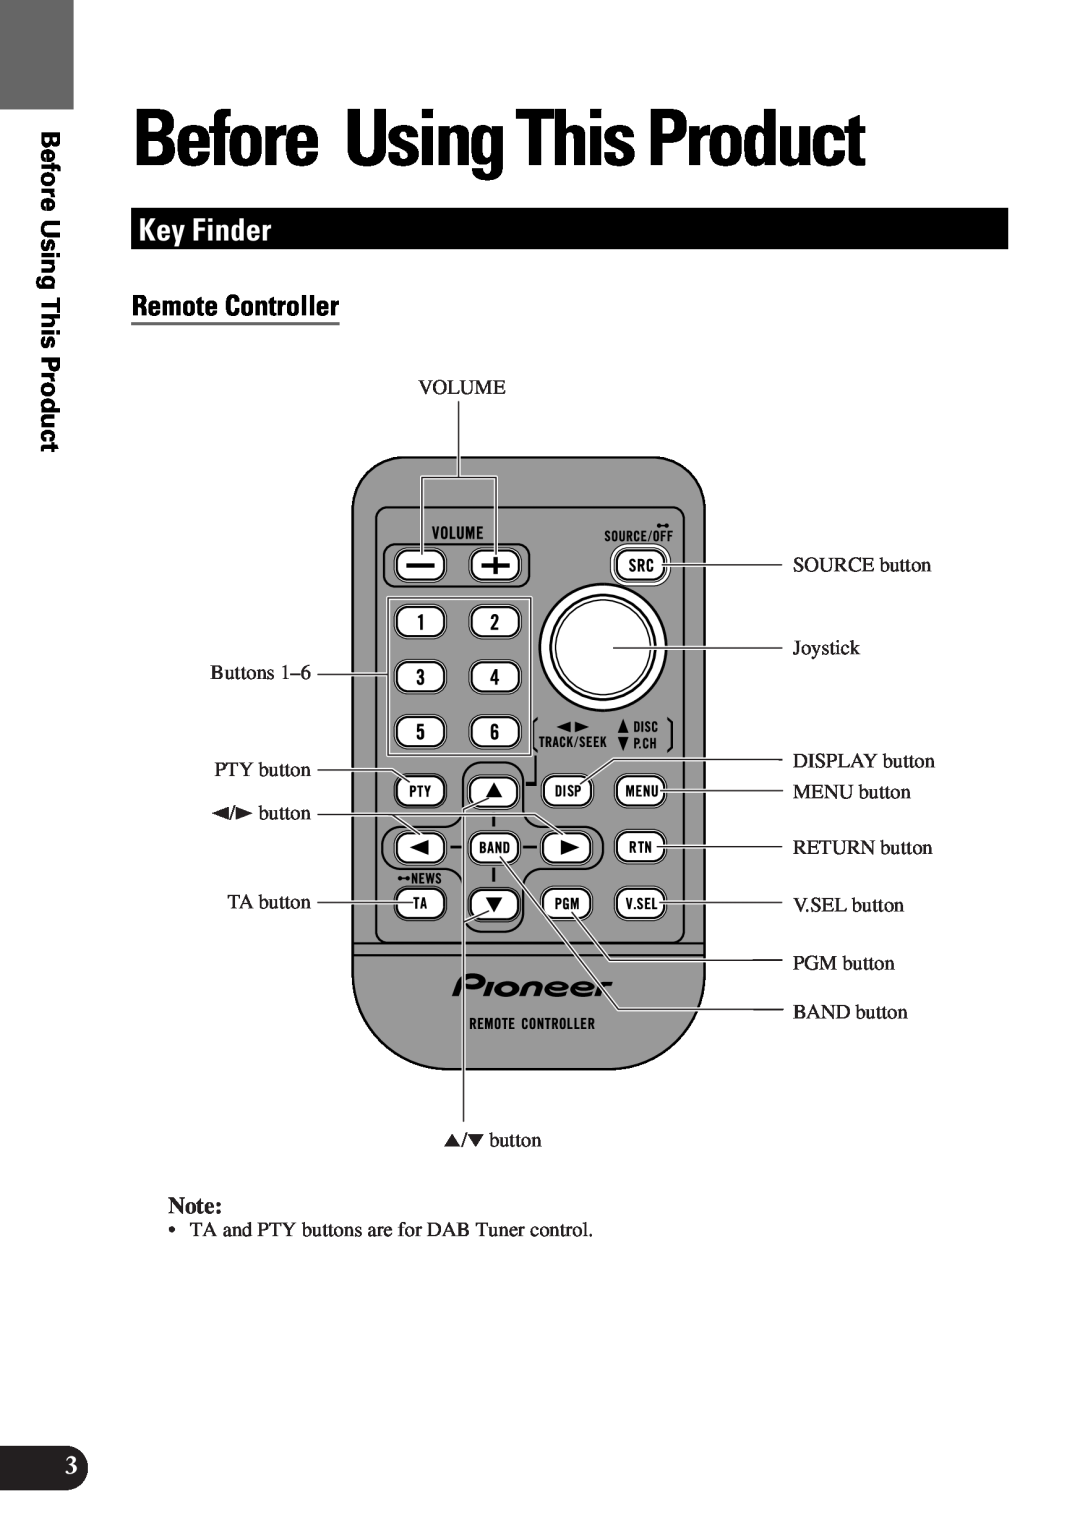 Pioneer AVM-P9000 owner manual Key Finder, Remote Controller, Before Using This Product, DISPLAY button MENU button 